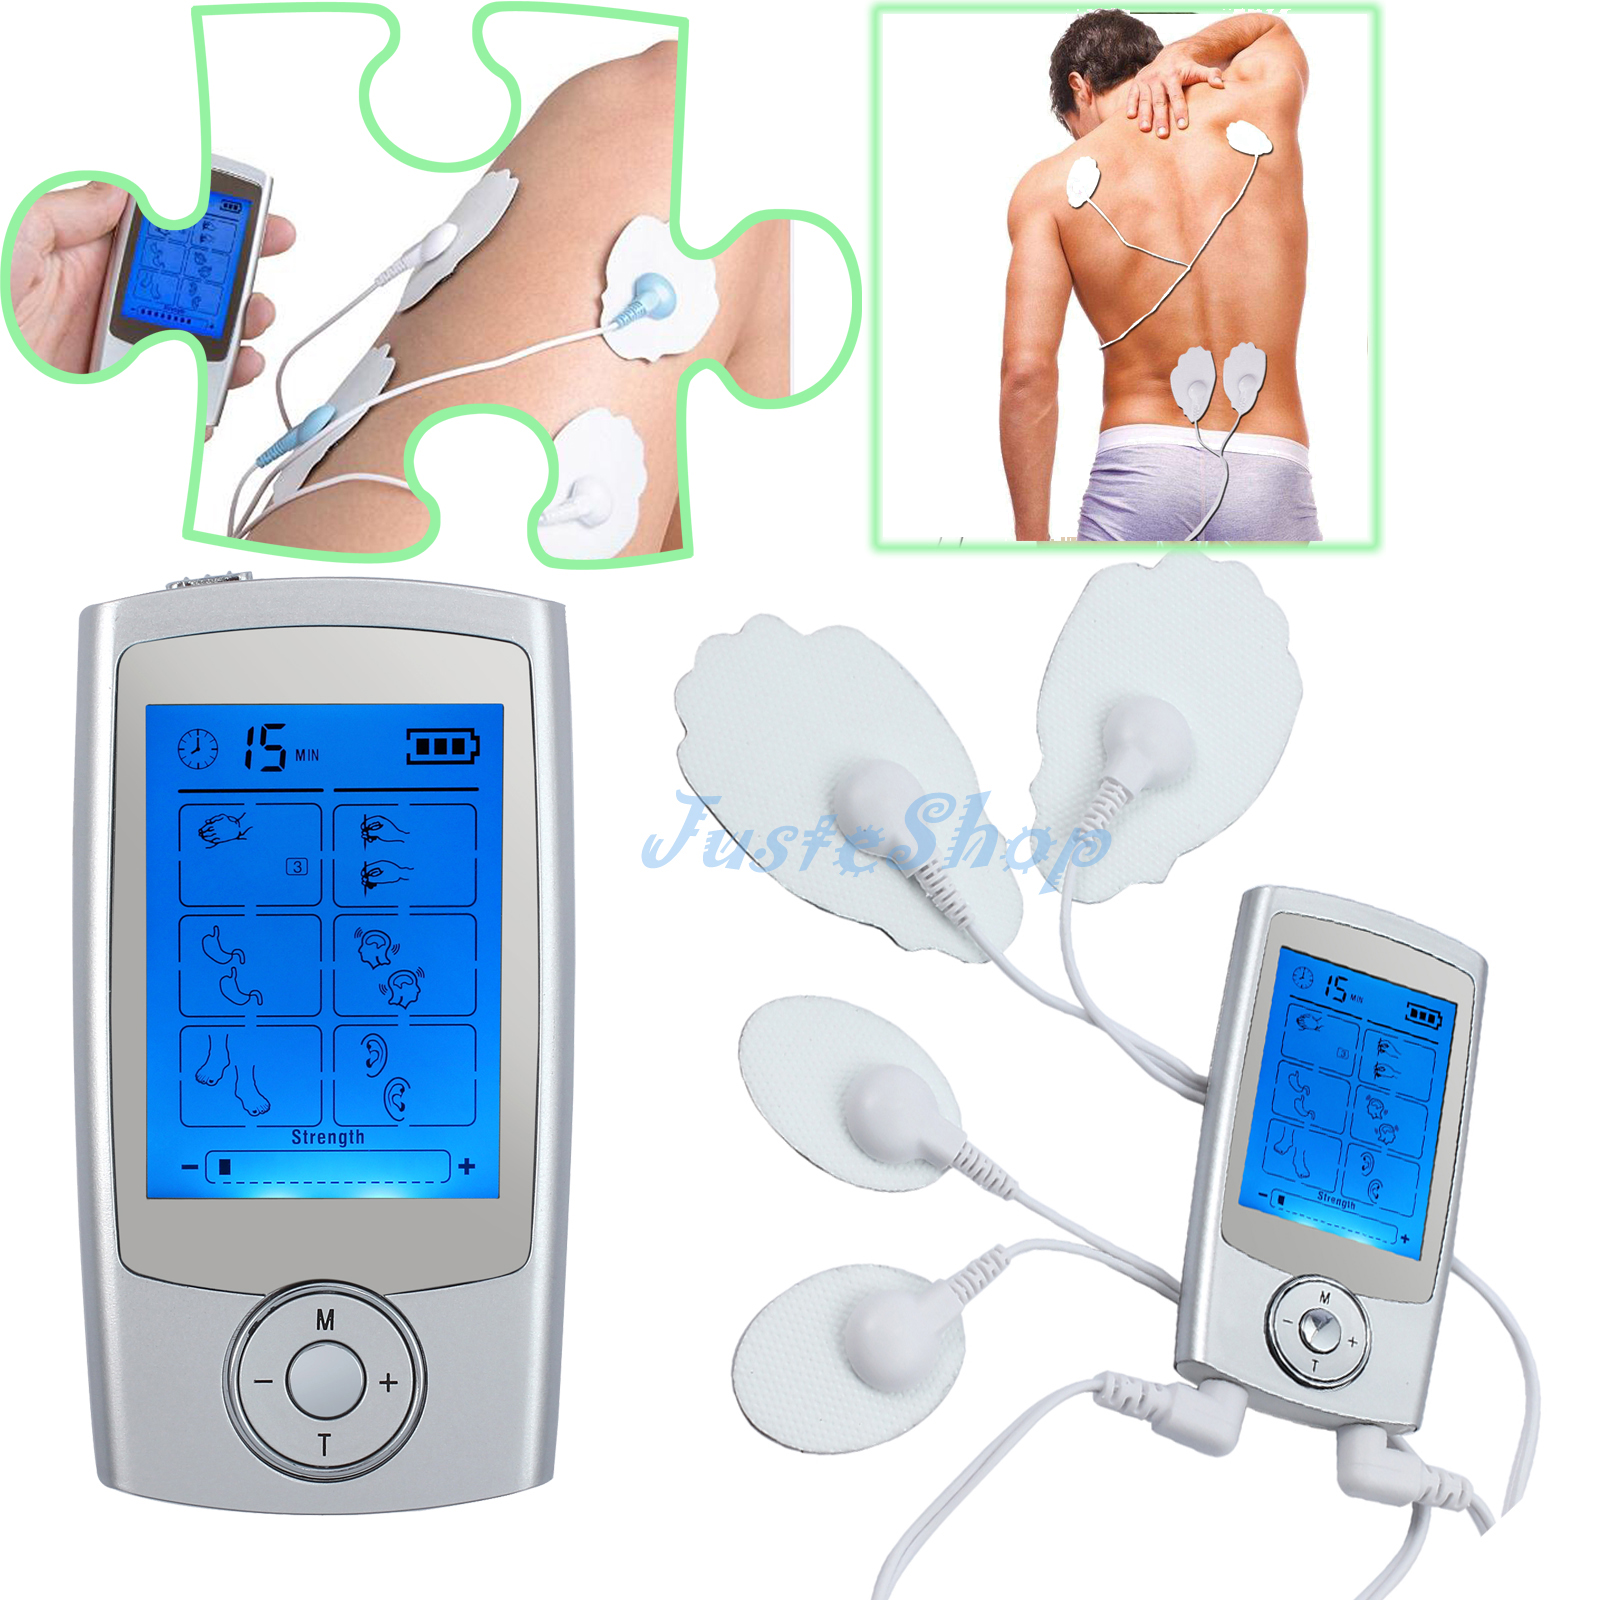 Details about 16 Mode TENS Unit Digital Electronic Pulse Massager Body Muscle Therapy 10 level